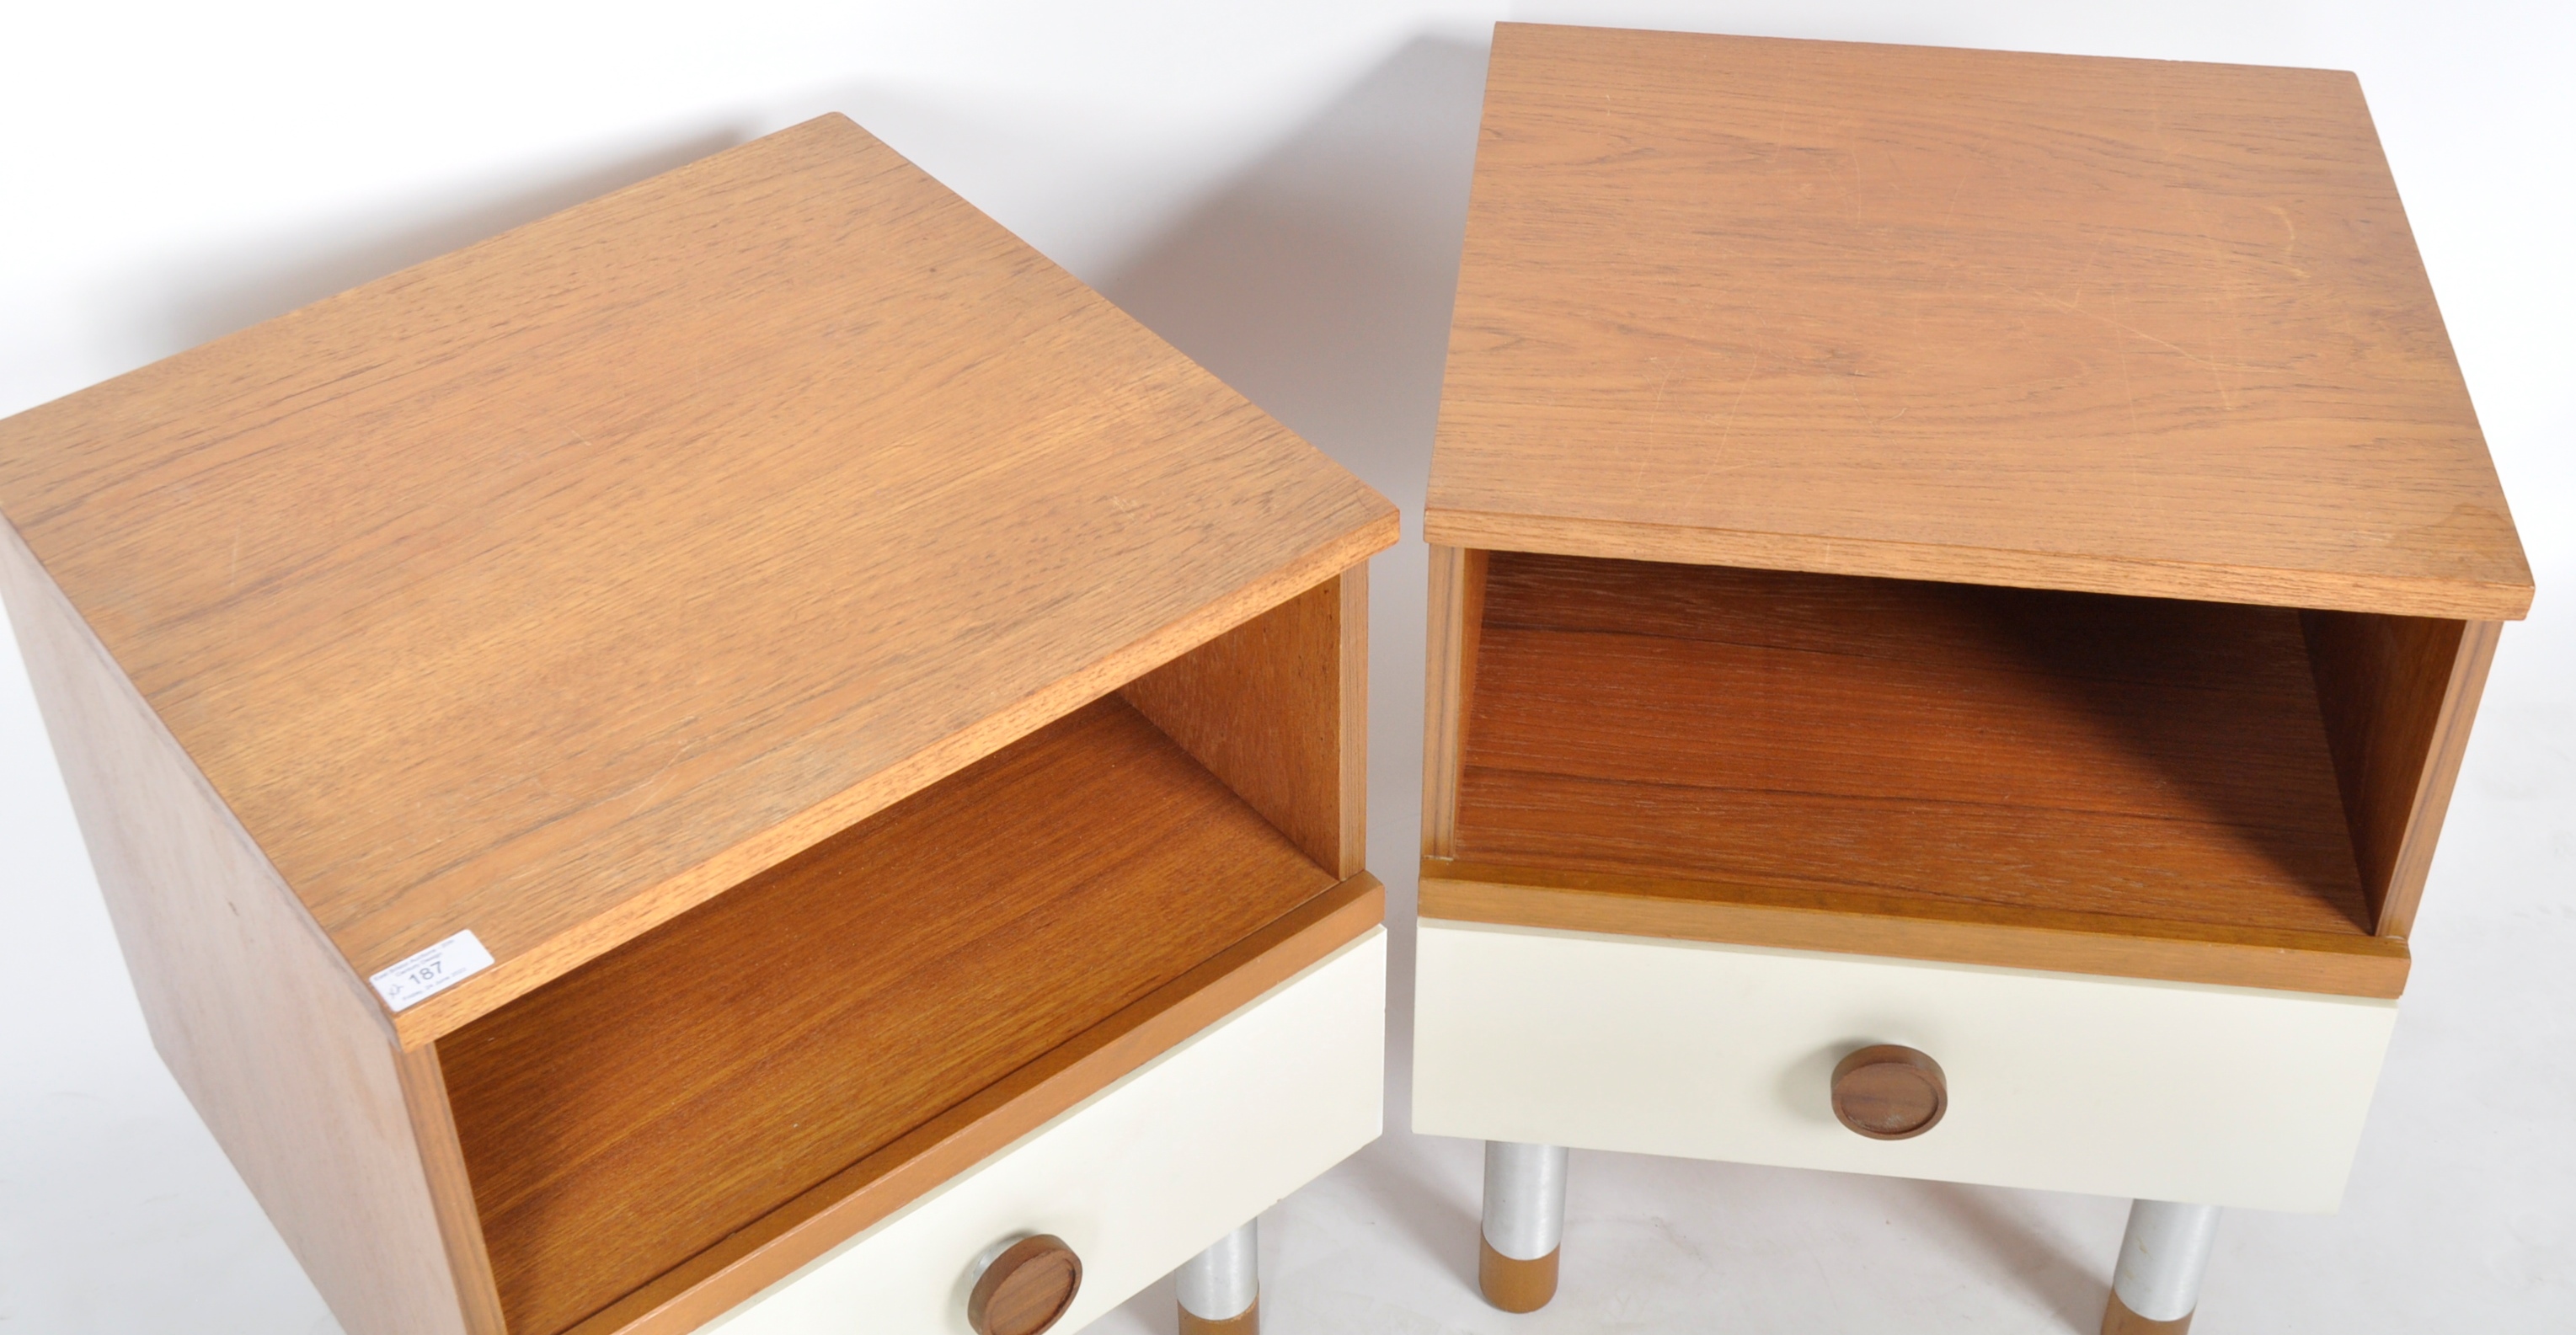 MATCHING PAIR OF RETRO BRITISH DESIGN BEDSIDE TABLES - Image 3 of 5